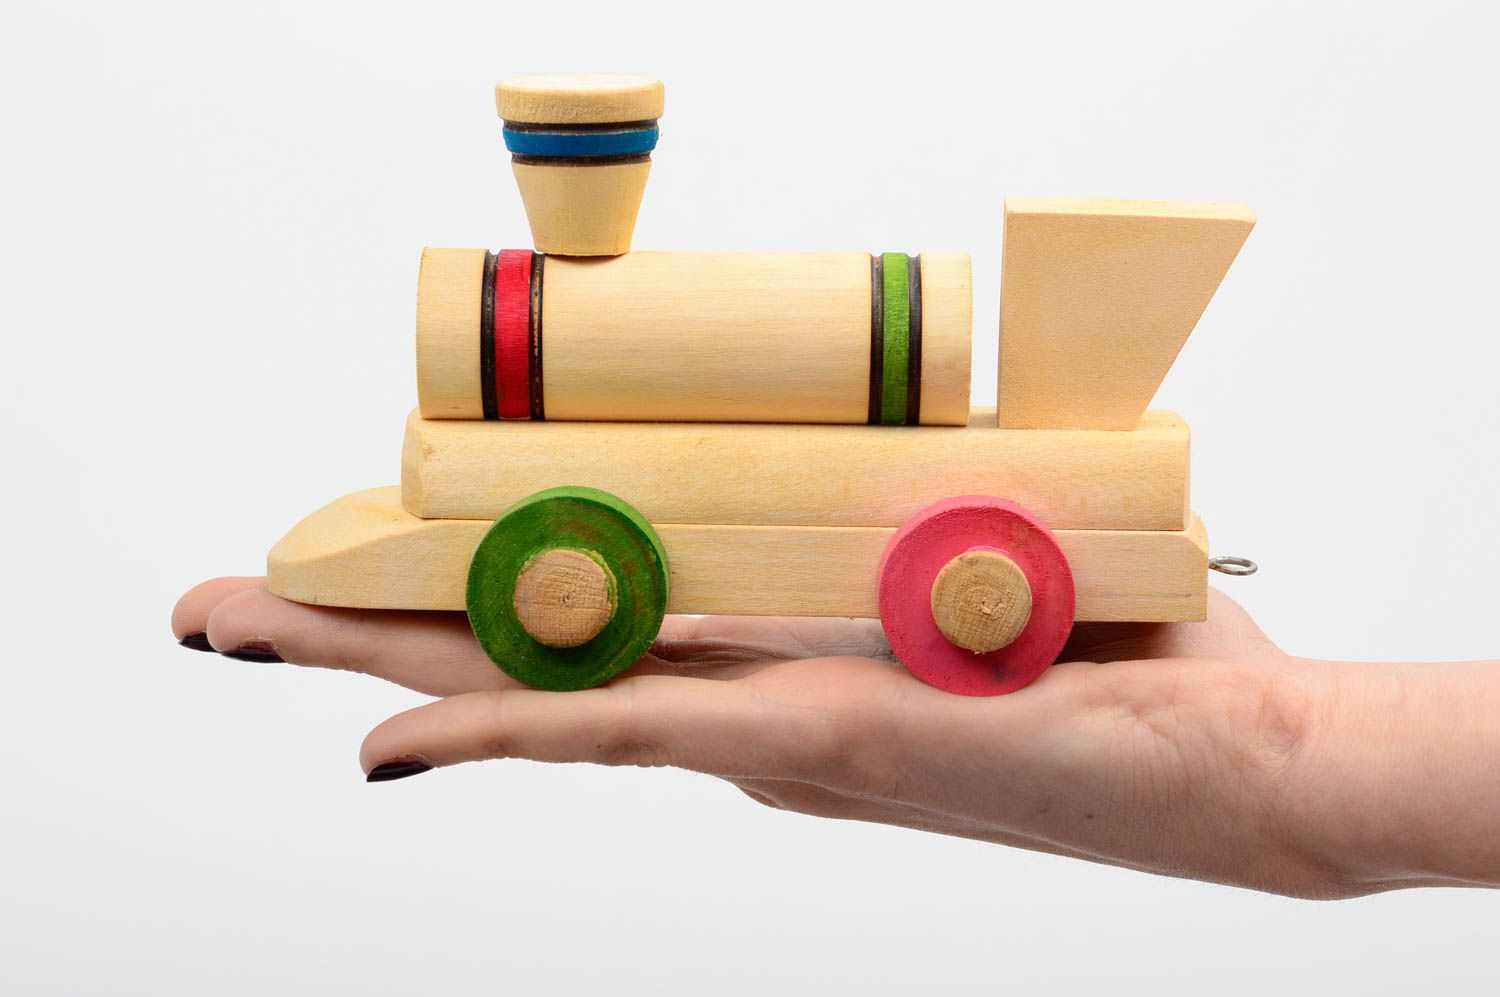 Wooden train toy handmade toy homemade home decor wooden gifts presents for kids photo 5